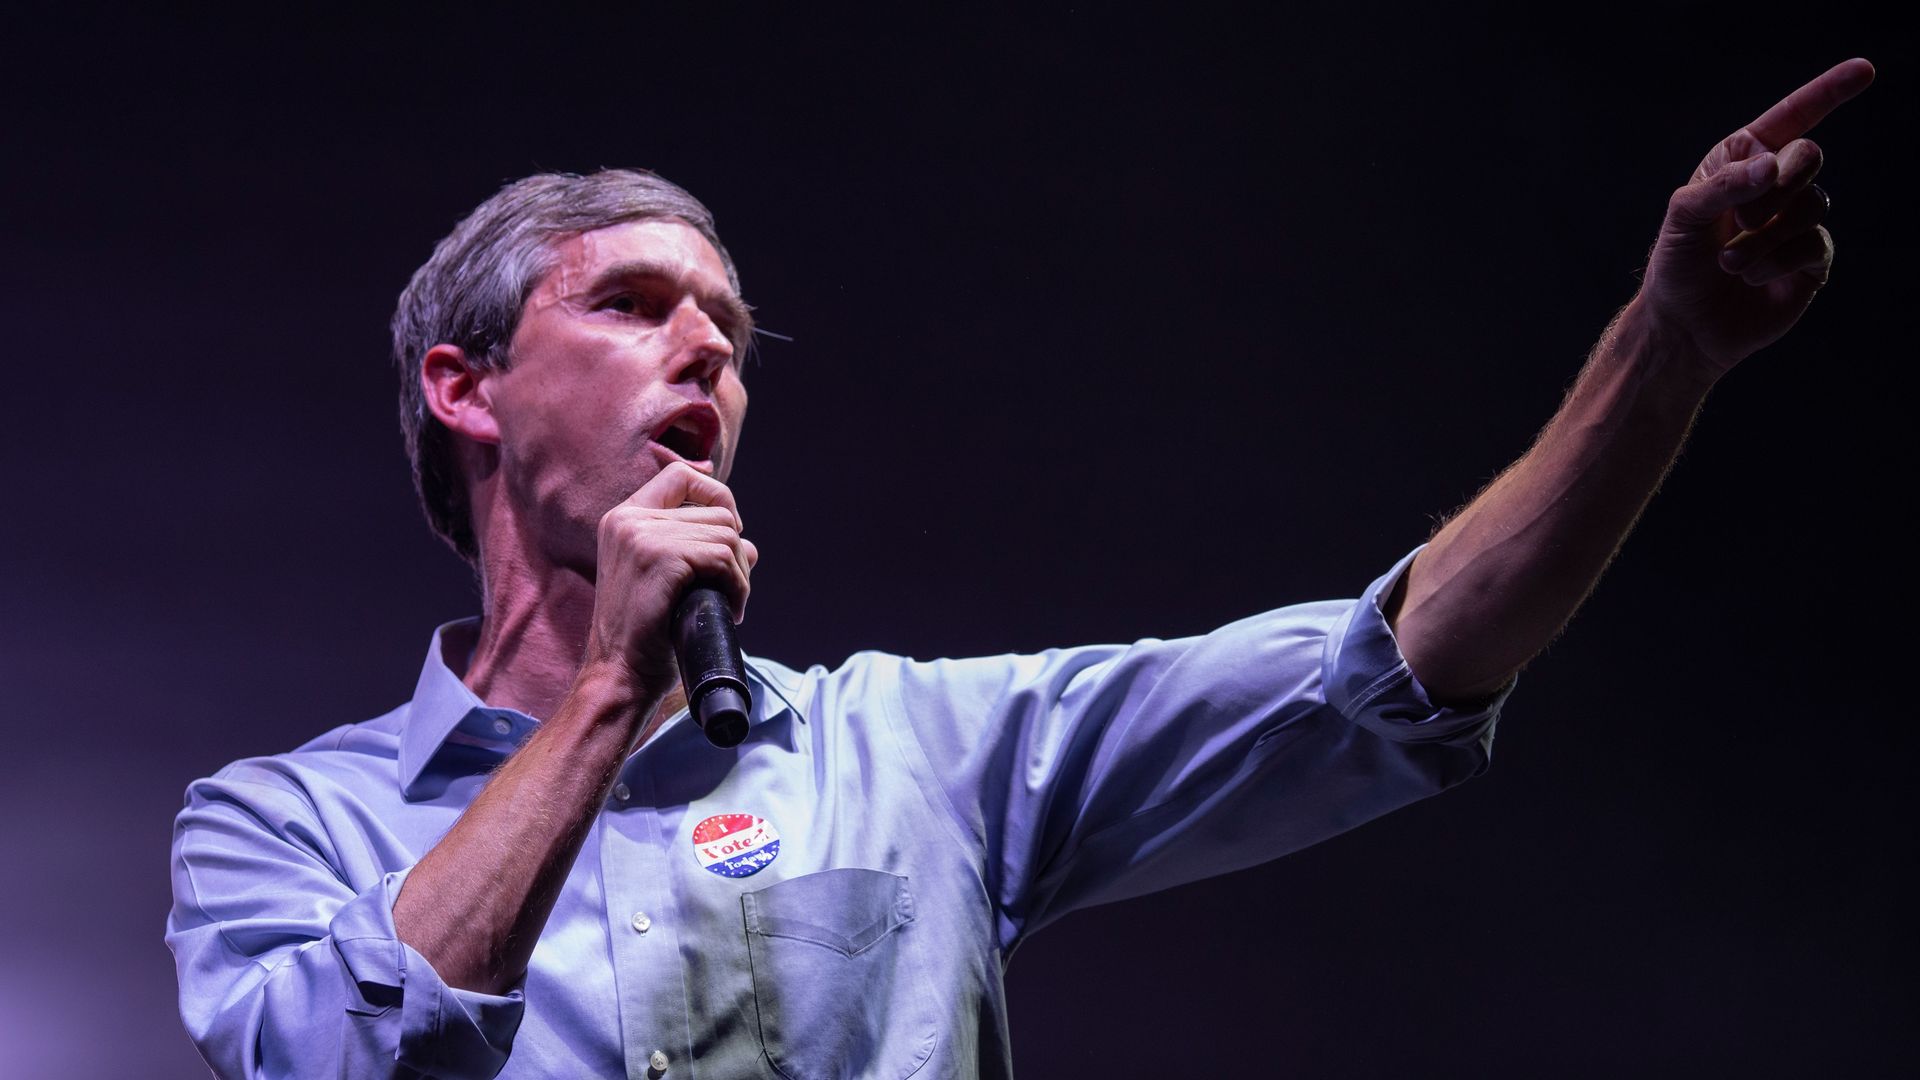 Beto O'Rourke standing on stage with a microphone in his hand